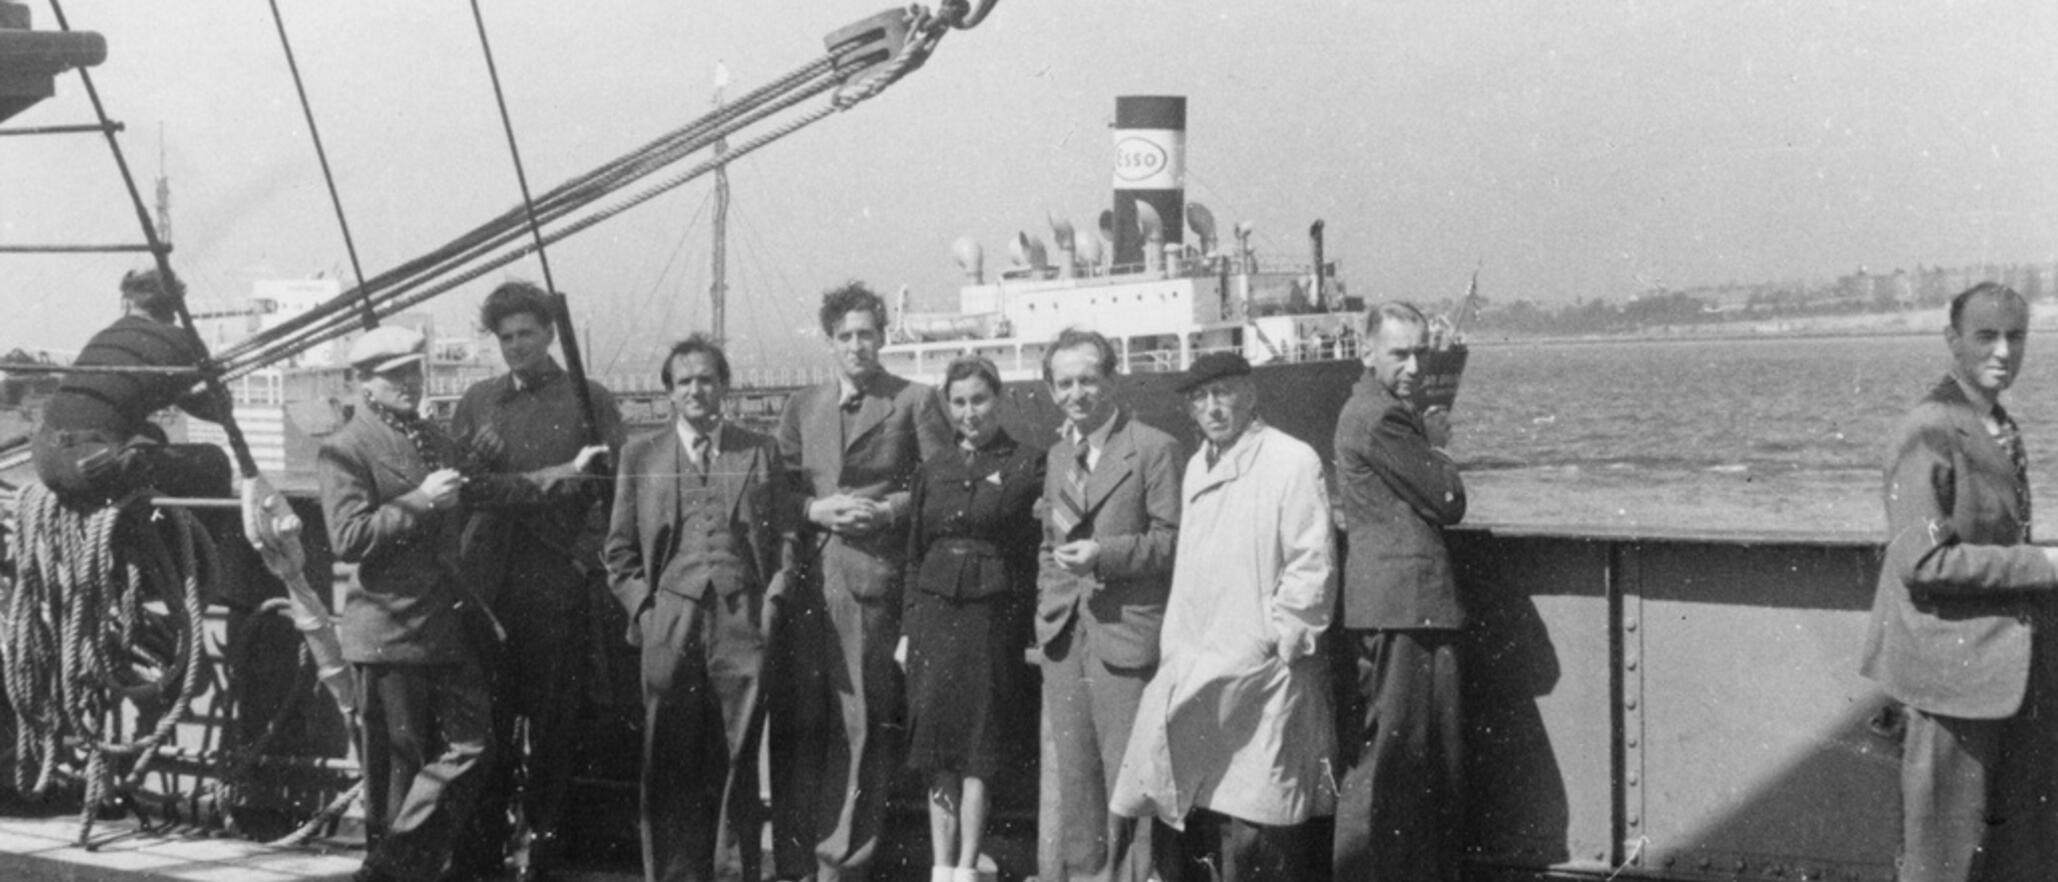 European refugees assisted by the Emergency Rescue Committee on board the 'Capitaine Paul-Lemerle,' a converted cargo ship sailing from Marseilles to Martinique, 25 March 1941.